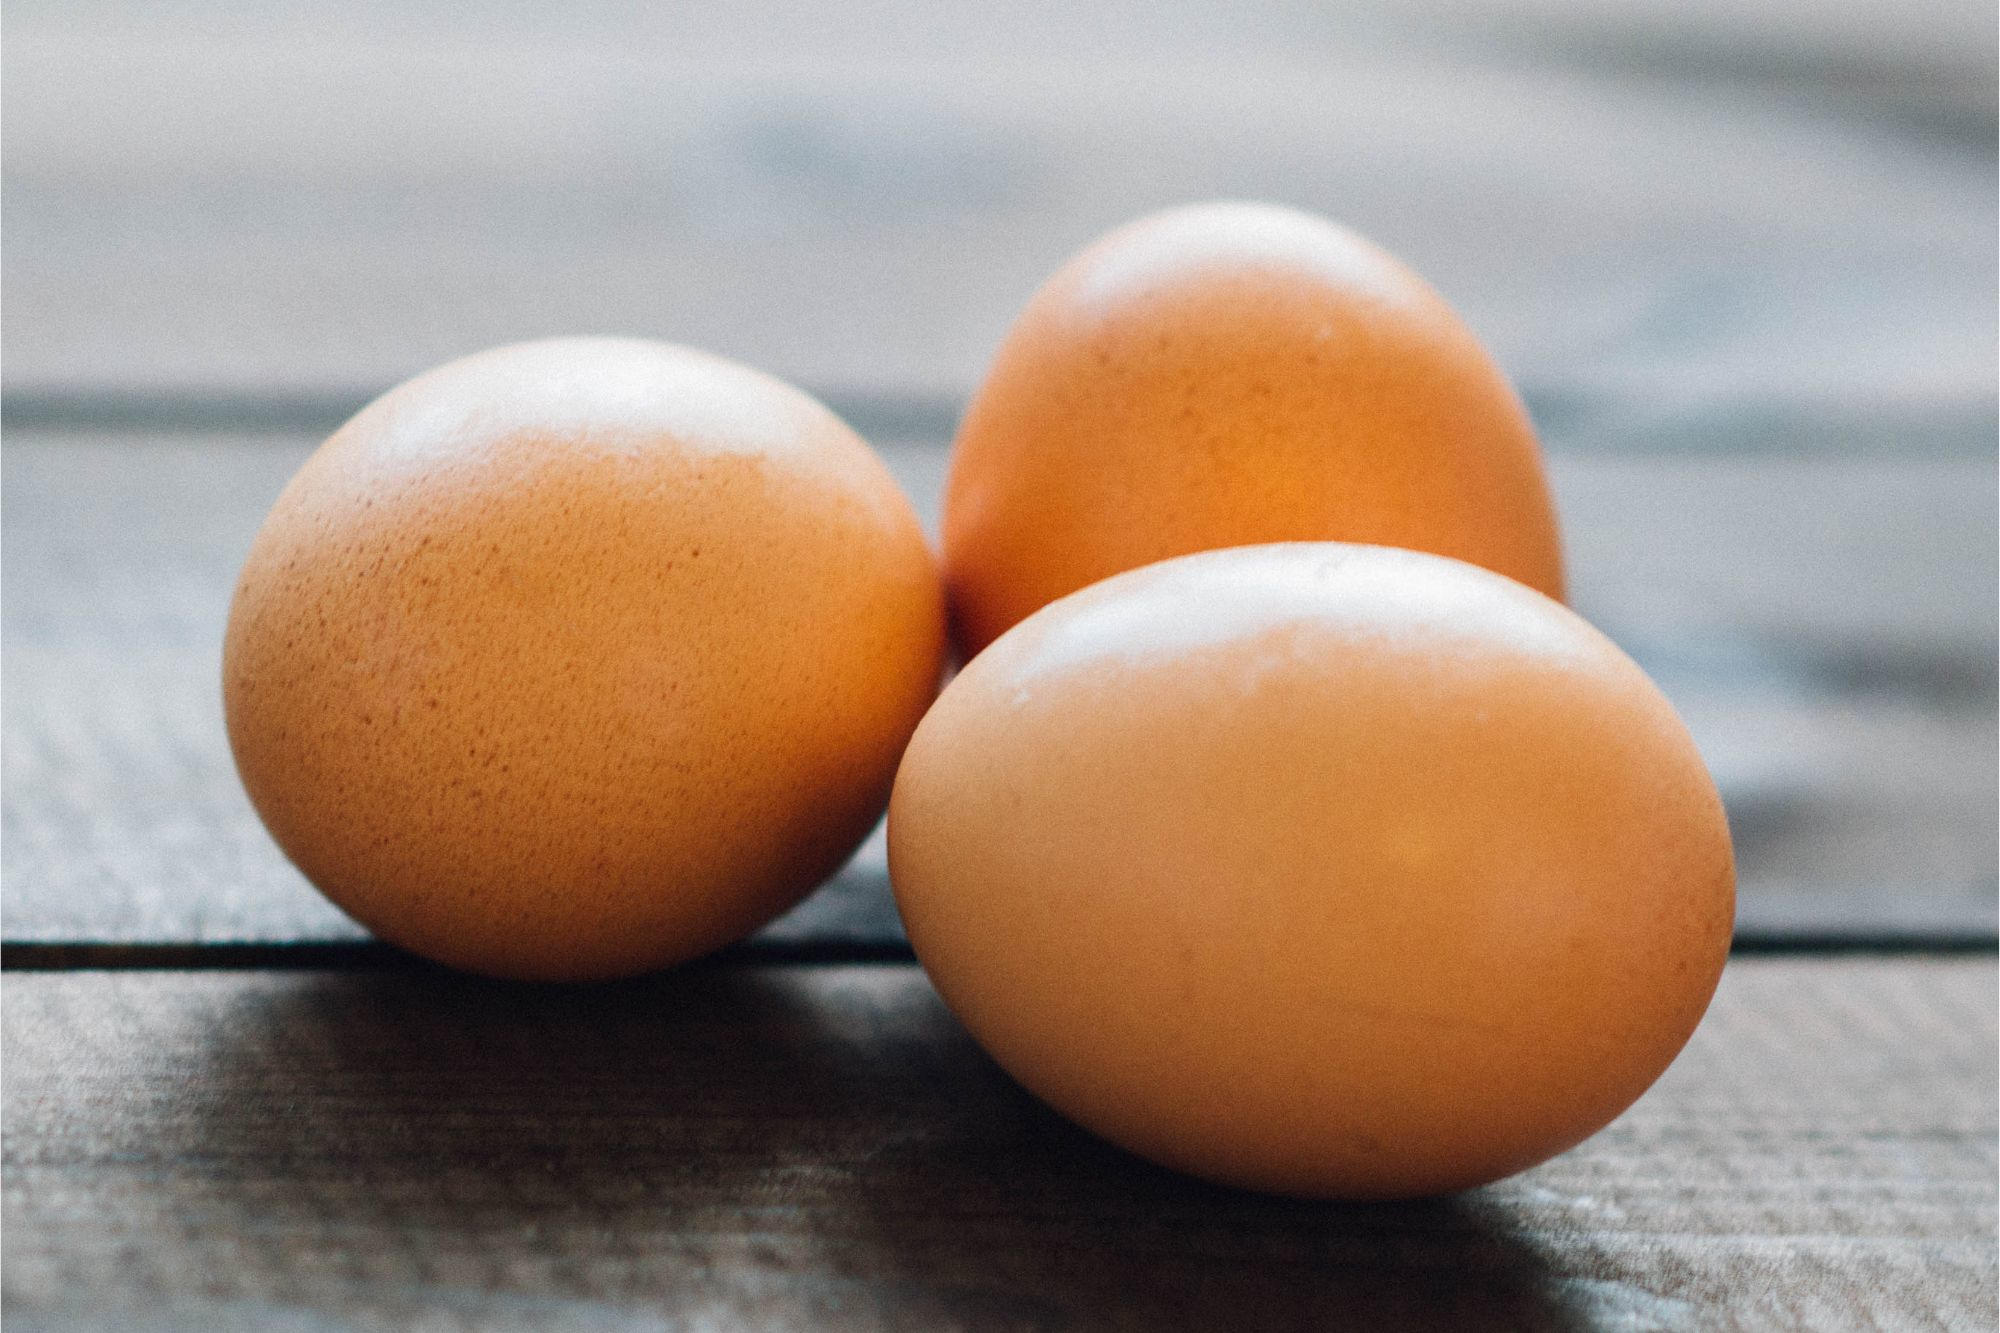 New Research Sheds Light on Eggs’ Surprising Health Benefits